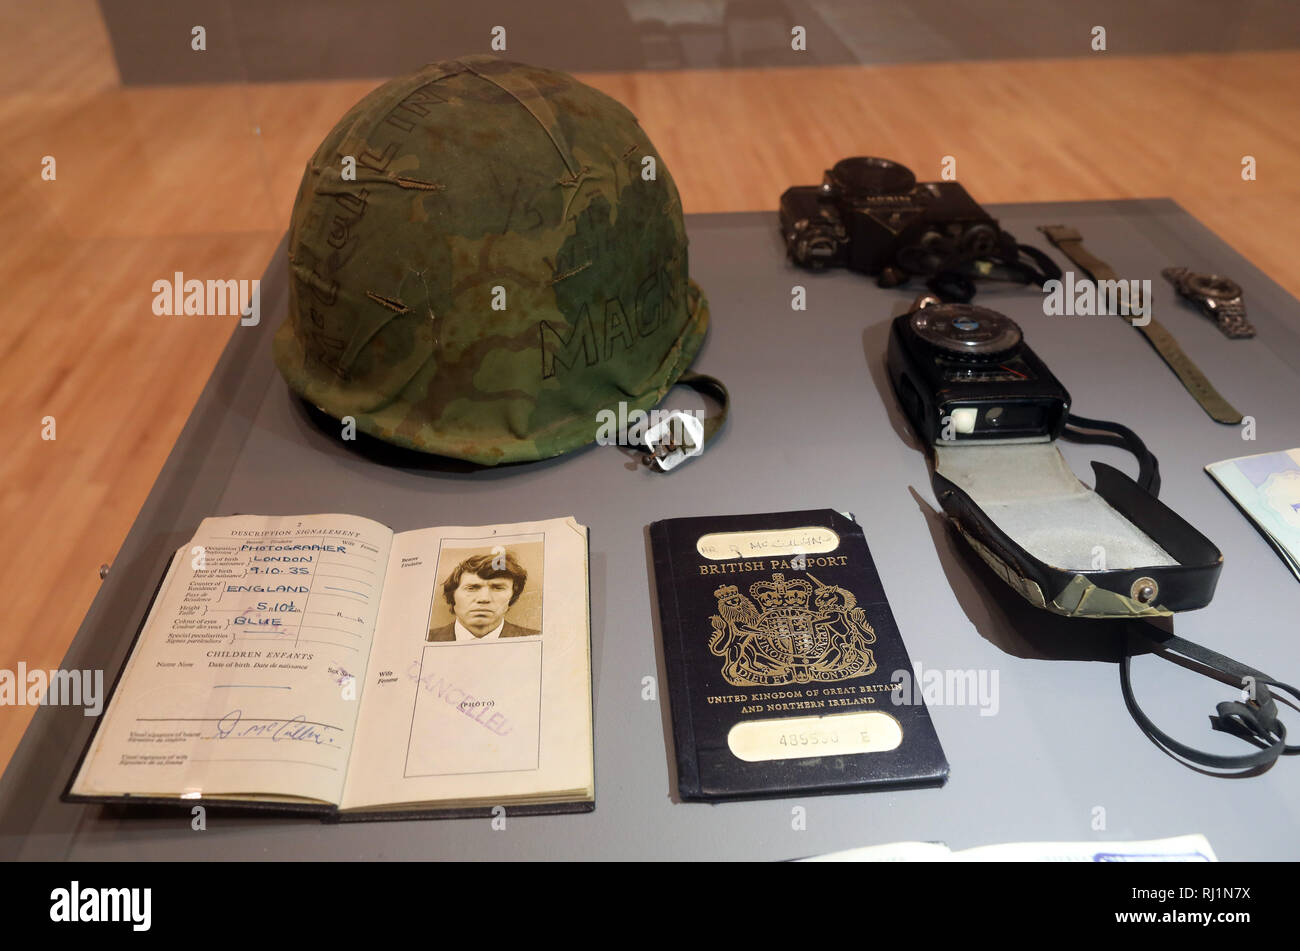 Pic shows: Possessions of Don McCullin on display including  His passport and visa stamps from the Vietnam war. US Army helmet Nikon Camera body with  Stock Photo